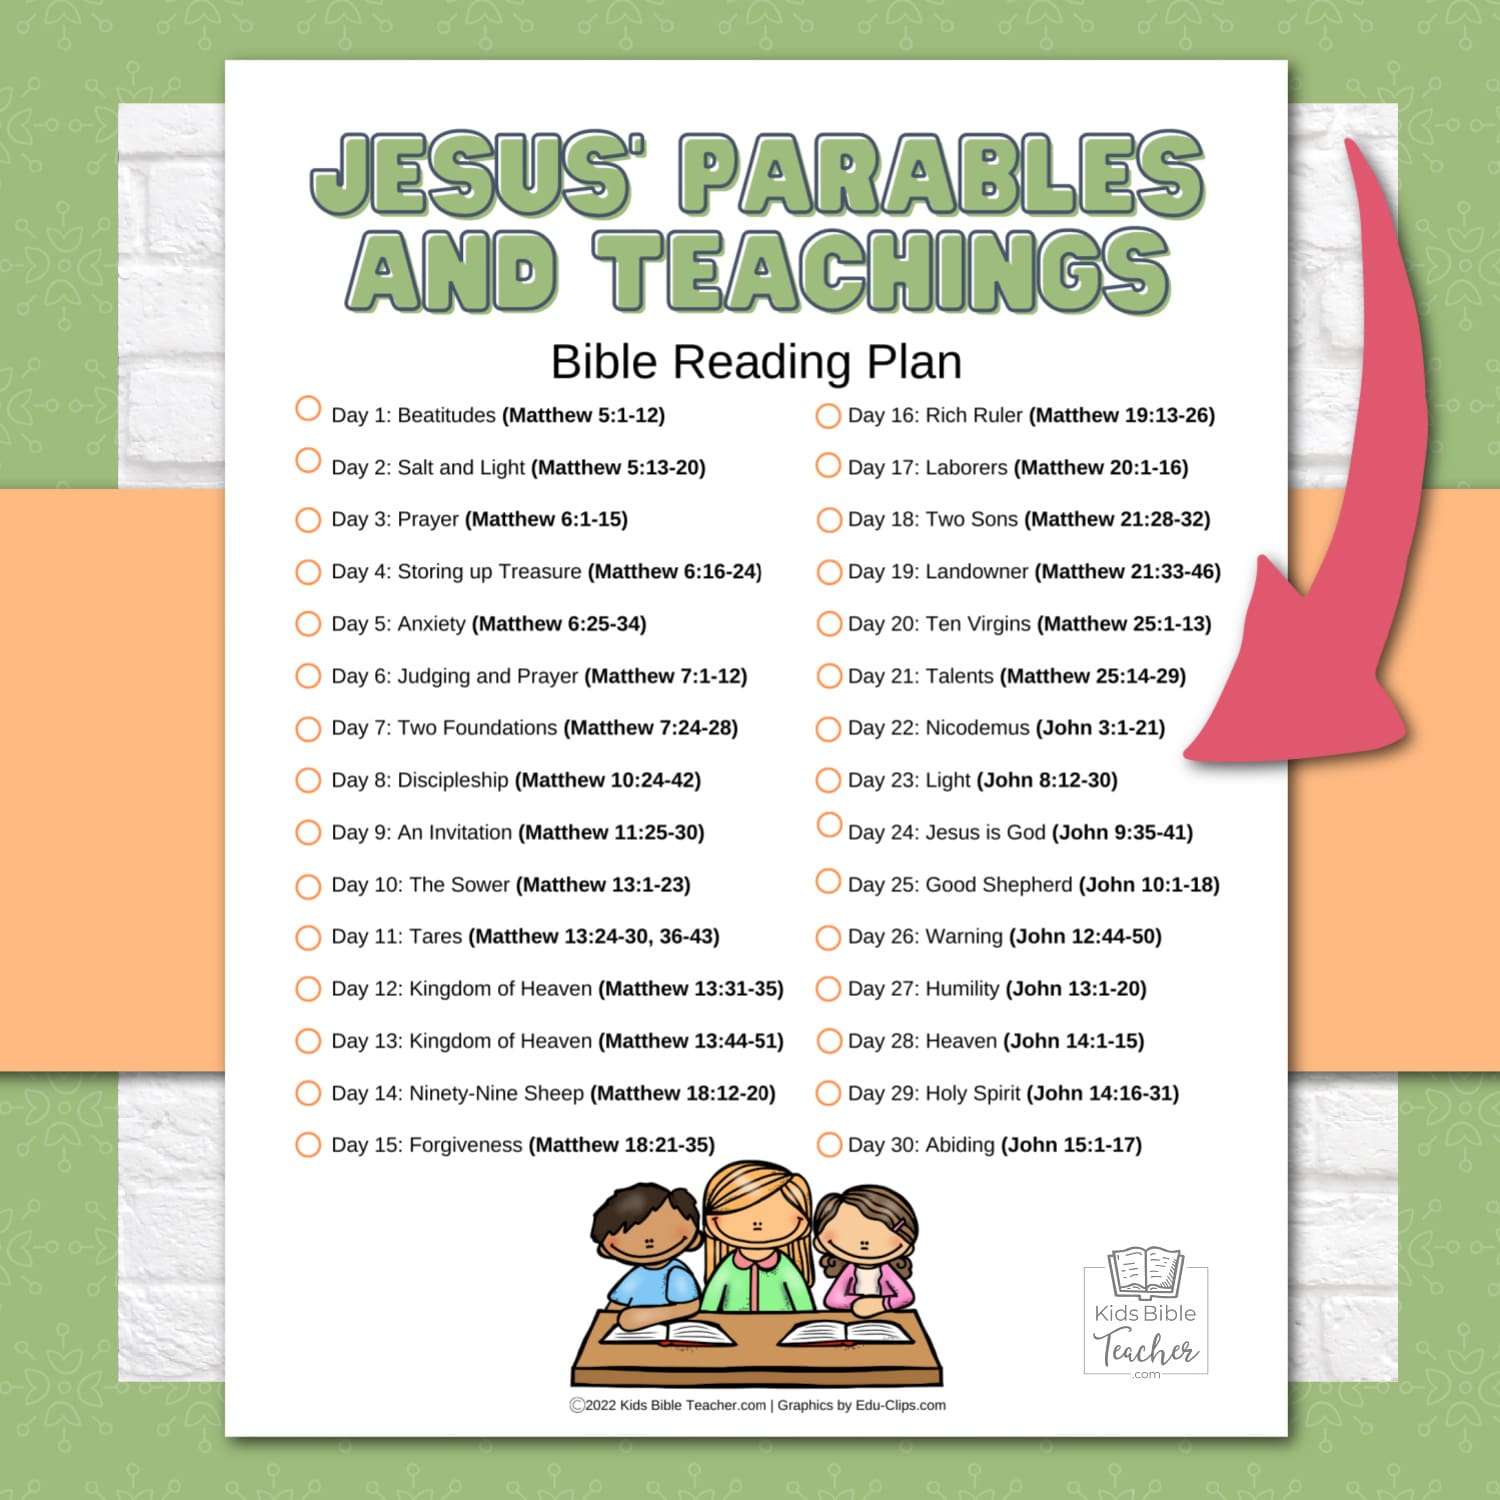 Help your kids deepen their faith with this FREE printable Jesus' Parables and Teachings Bible reading plan for kids.